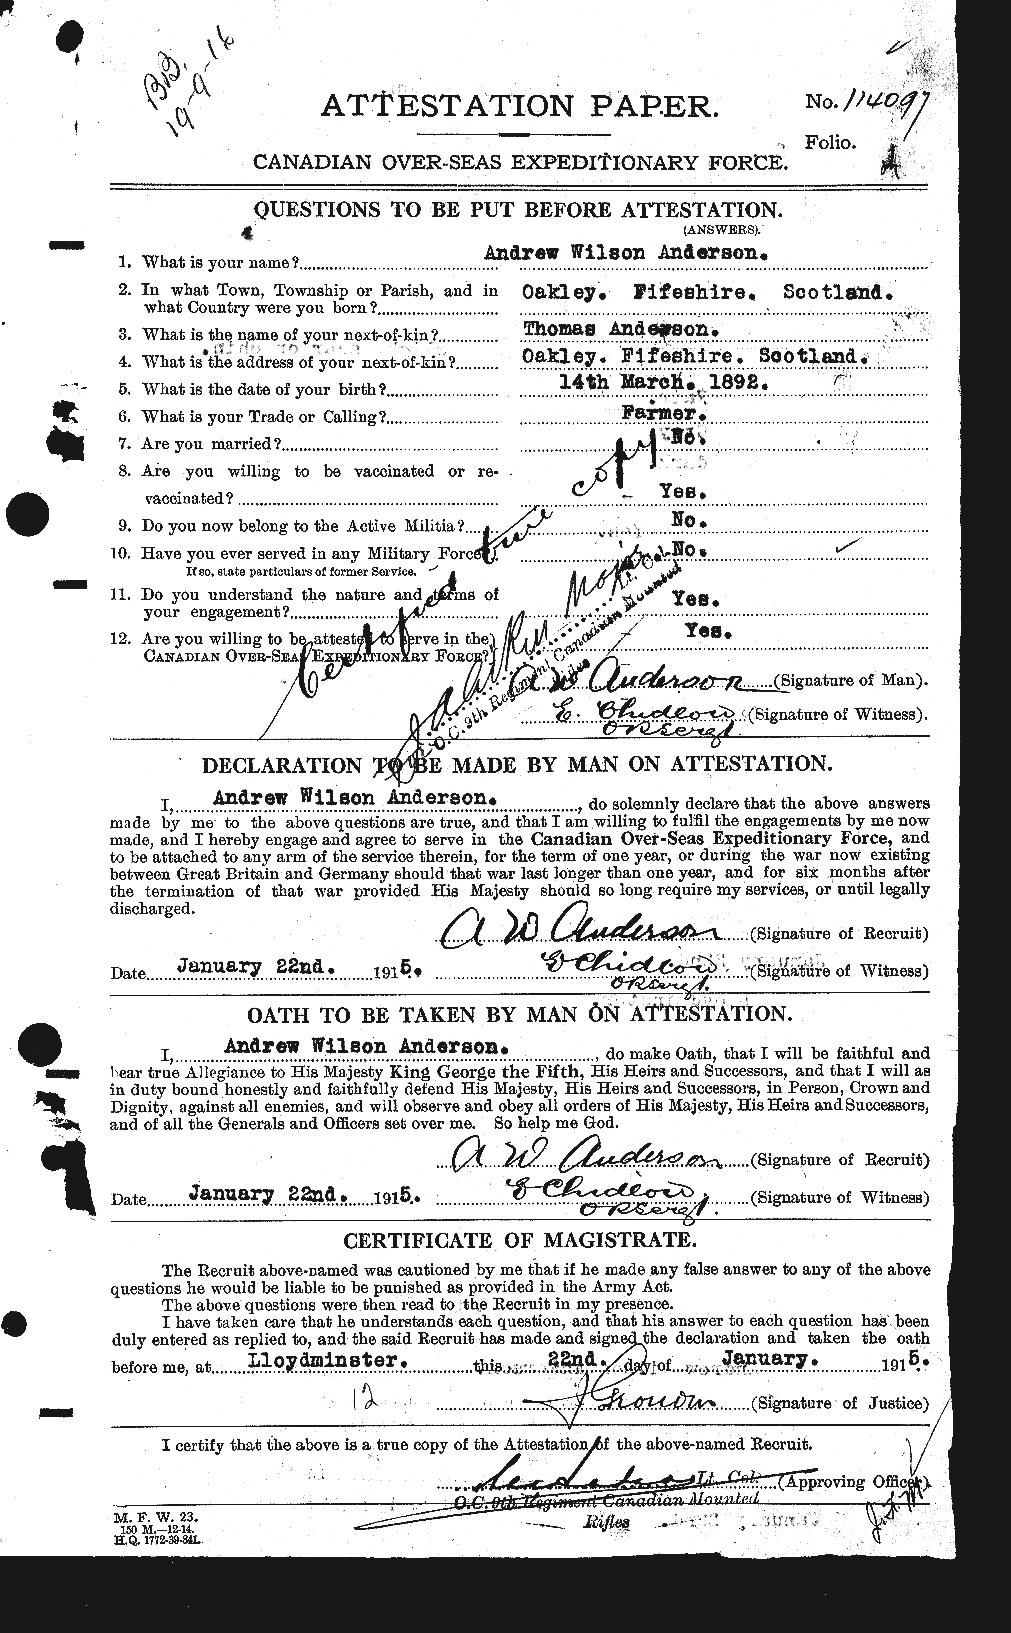 Personnel Records of the First World War - CEF 209395a